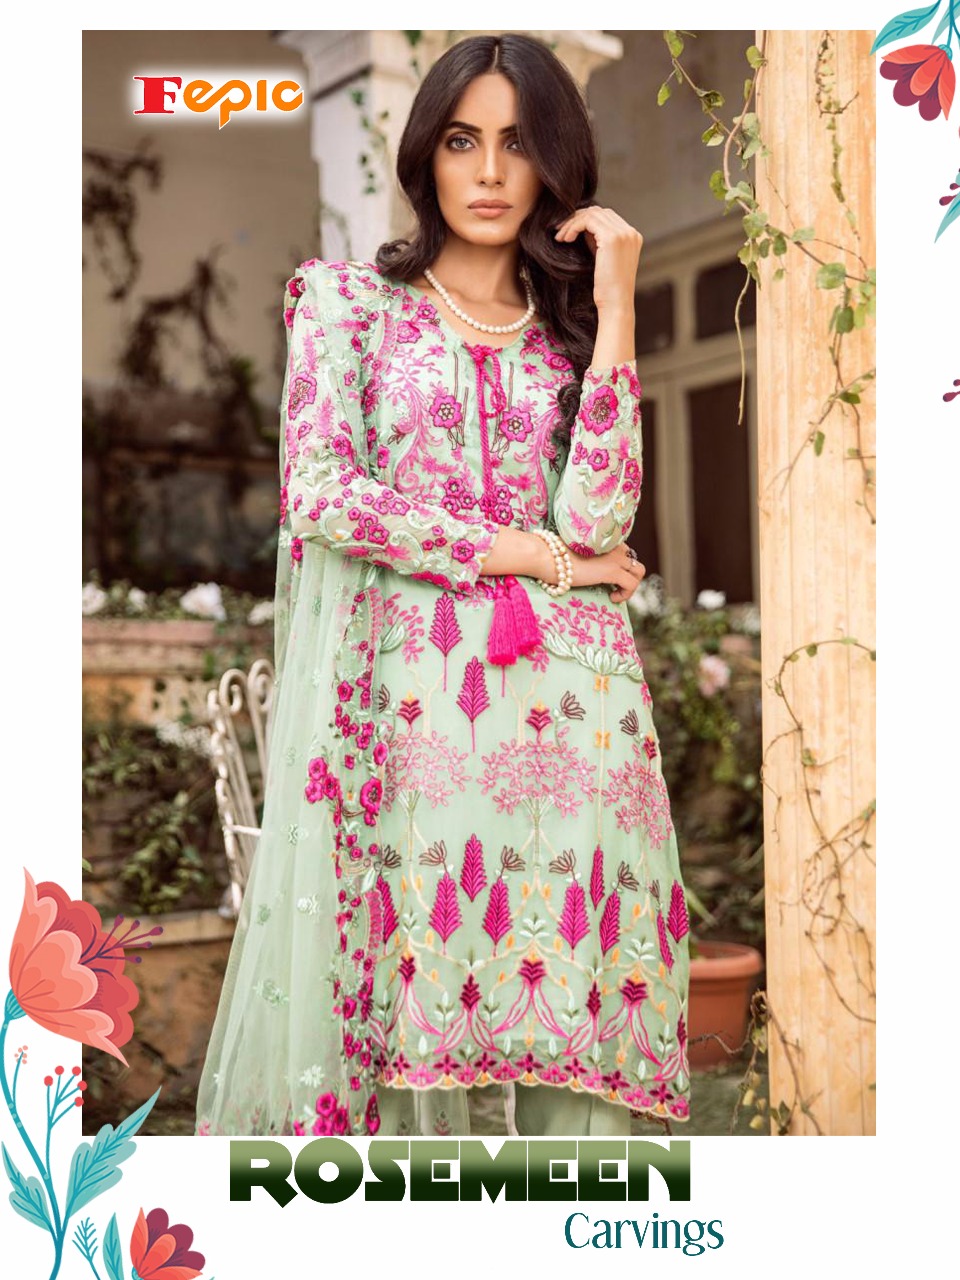 FEPIC presenting rosemeen carvings stylish pakistani collection of salwar kameez